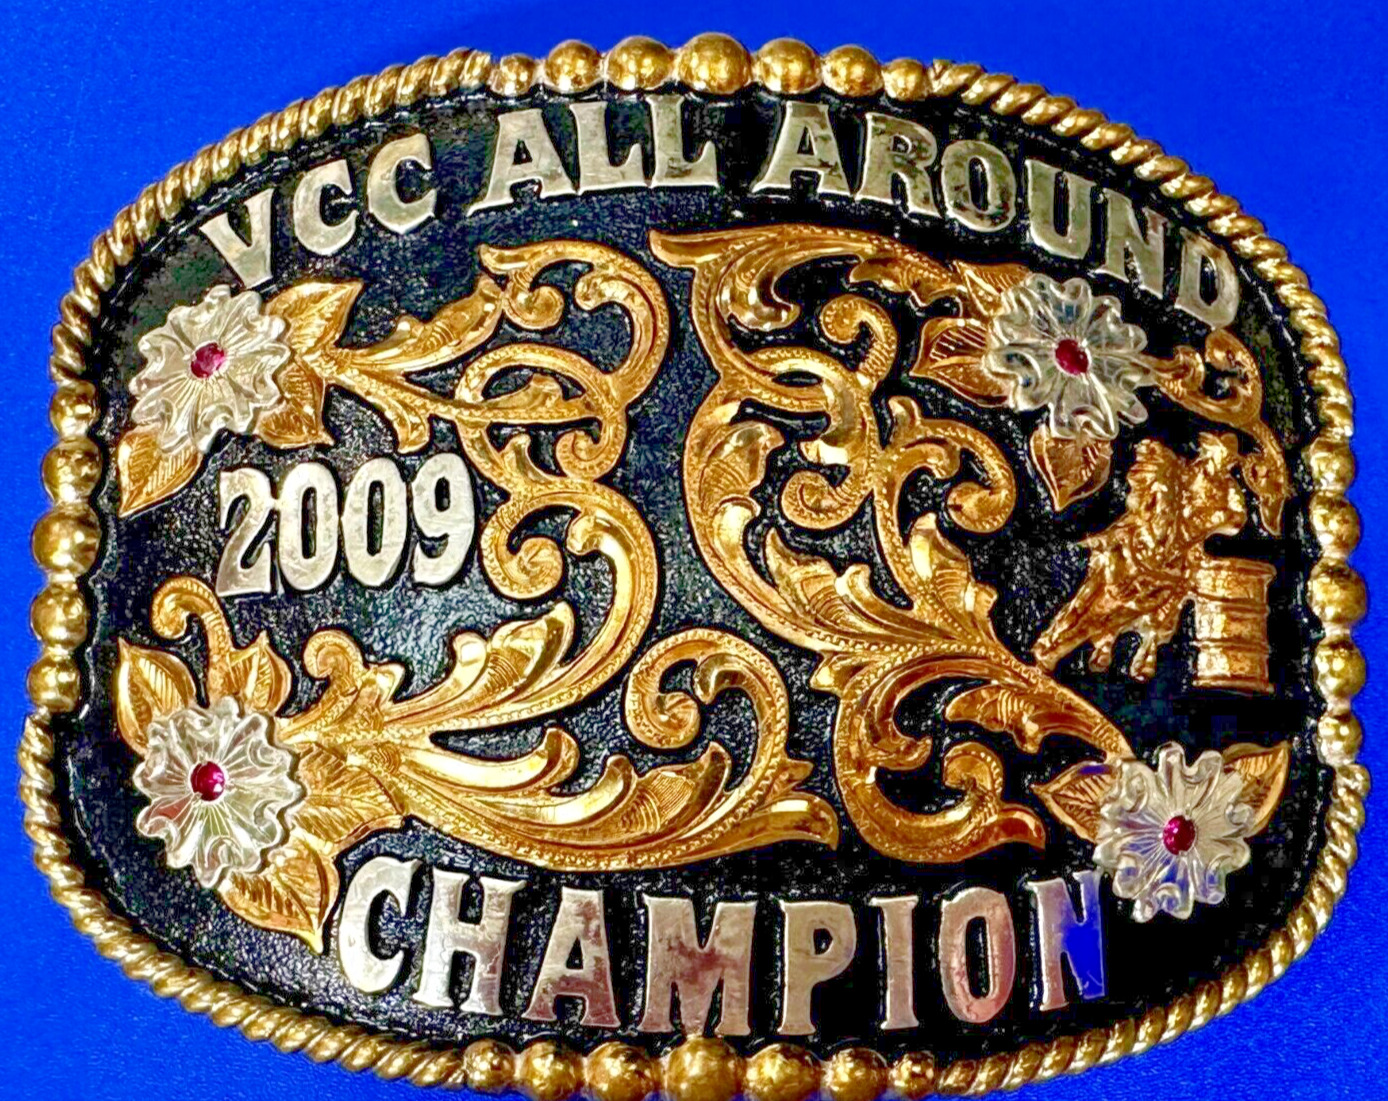 VCC All Around Champion 2009 Rodeo Trophy Belt Buckle by Cut Above Andy Andrews